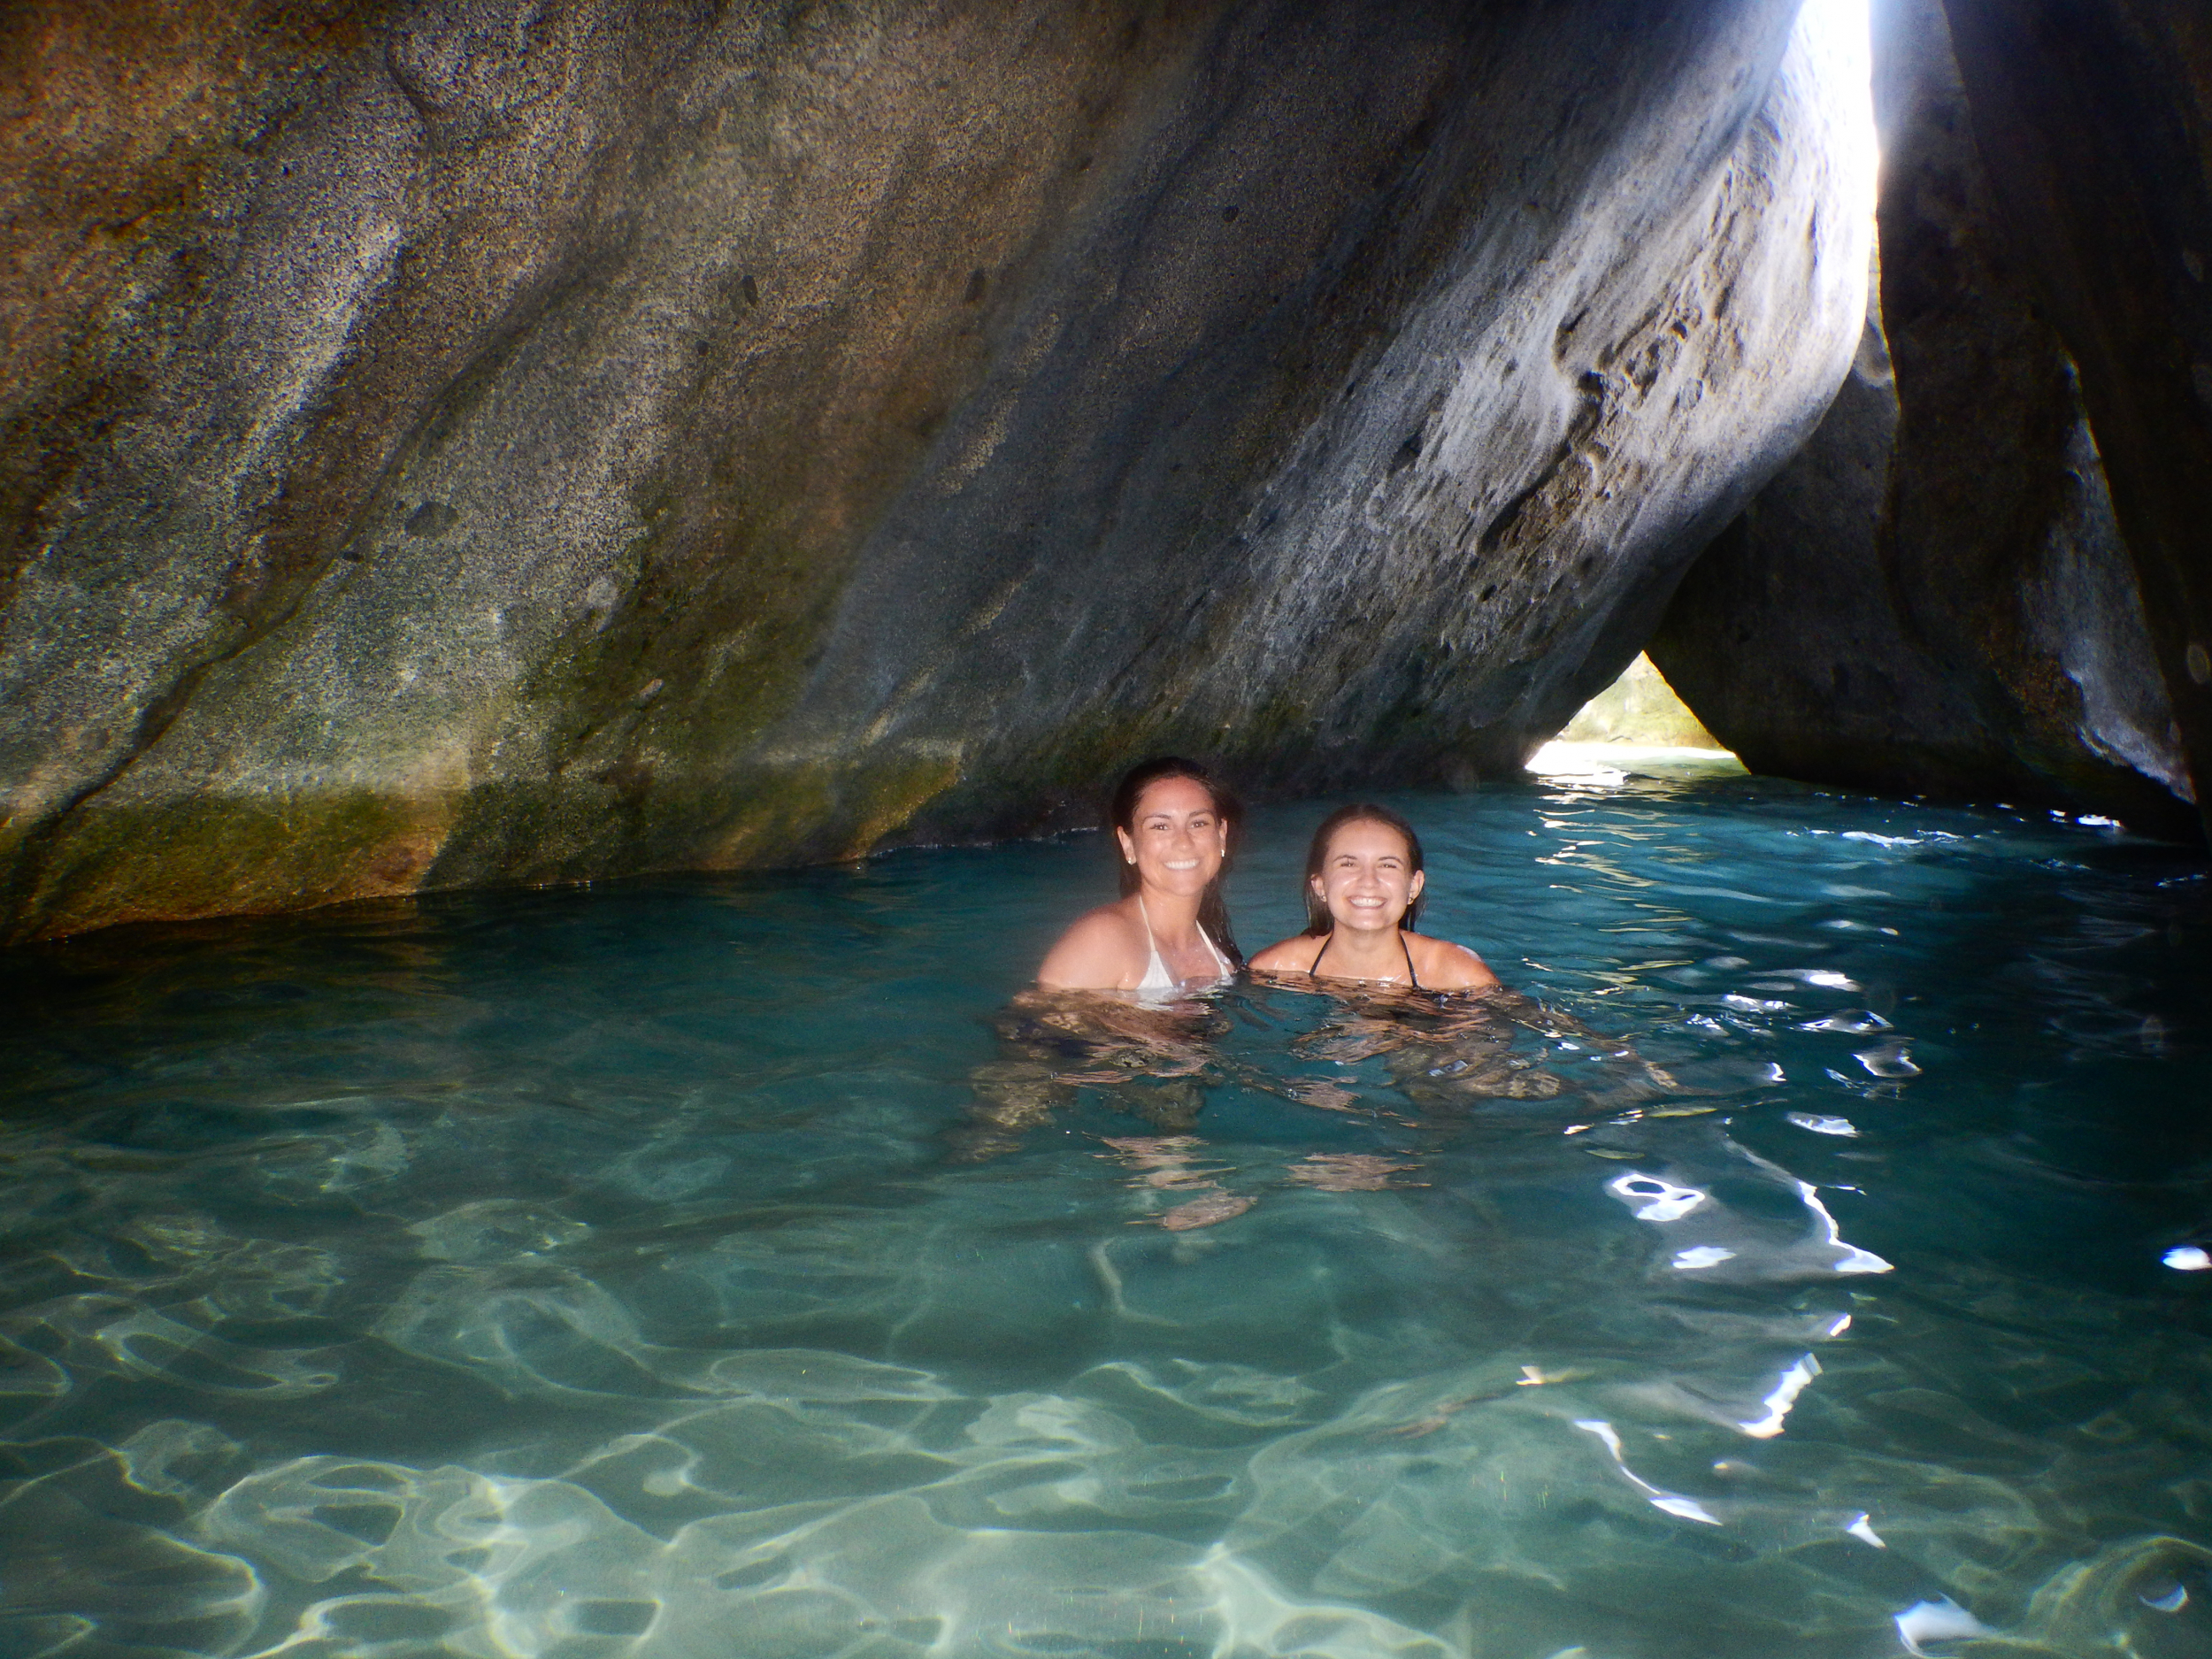 31. Maria and Cindy at caves in The Baths